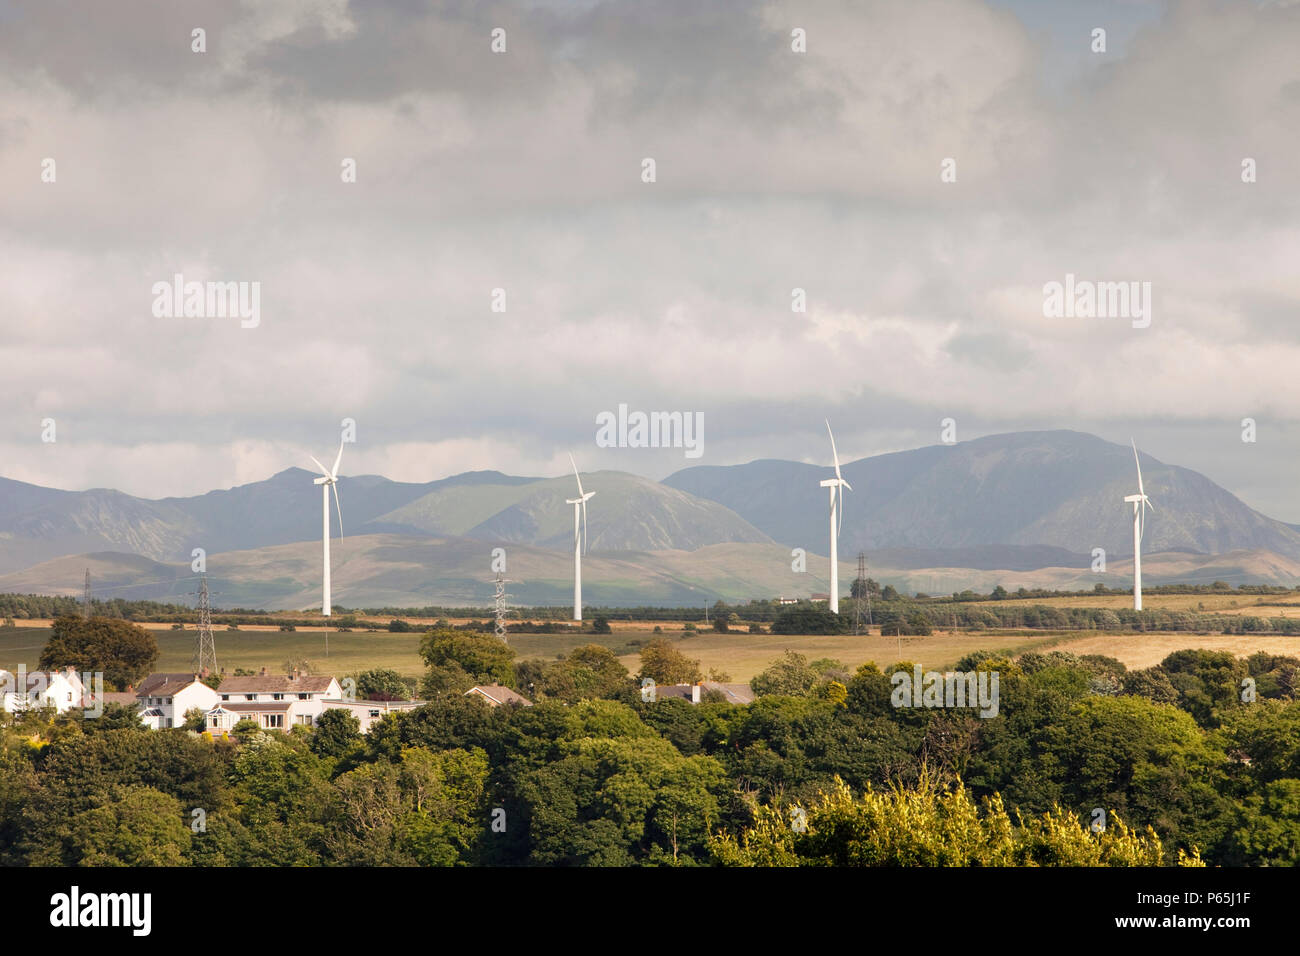 Wind turbines on the outskirts of Workington, Cumbria, UK, with the Lake District hills beyond. Stock Photo